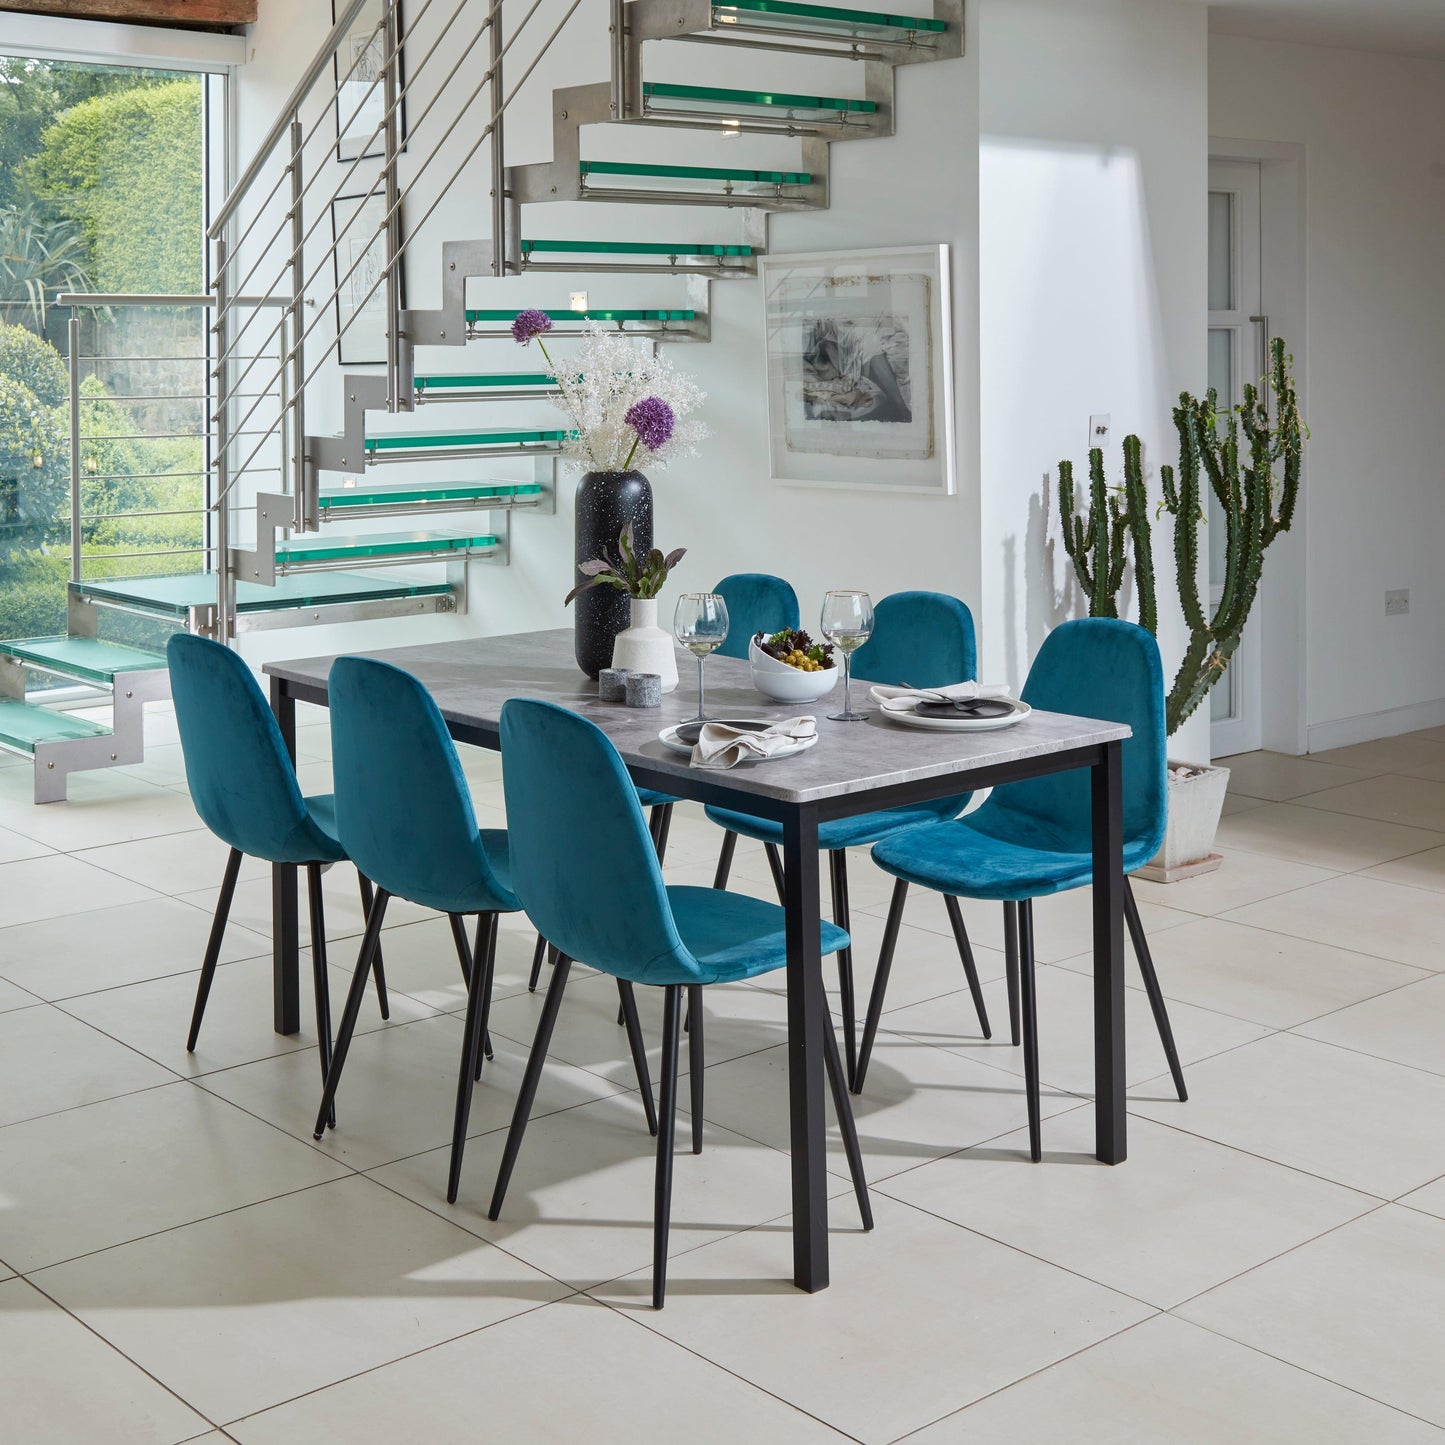 Ellis dining chairs - set of 2 - teal and black - Laura James